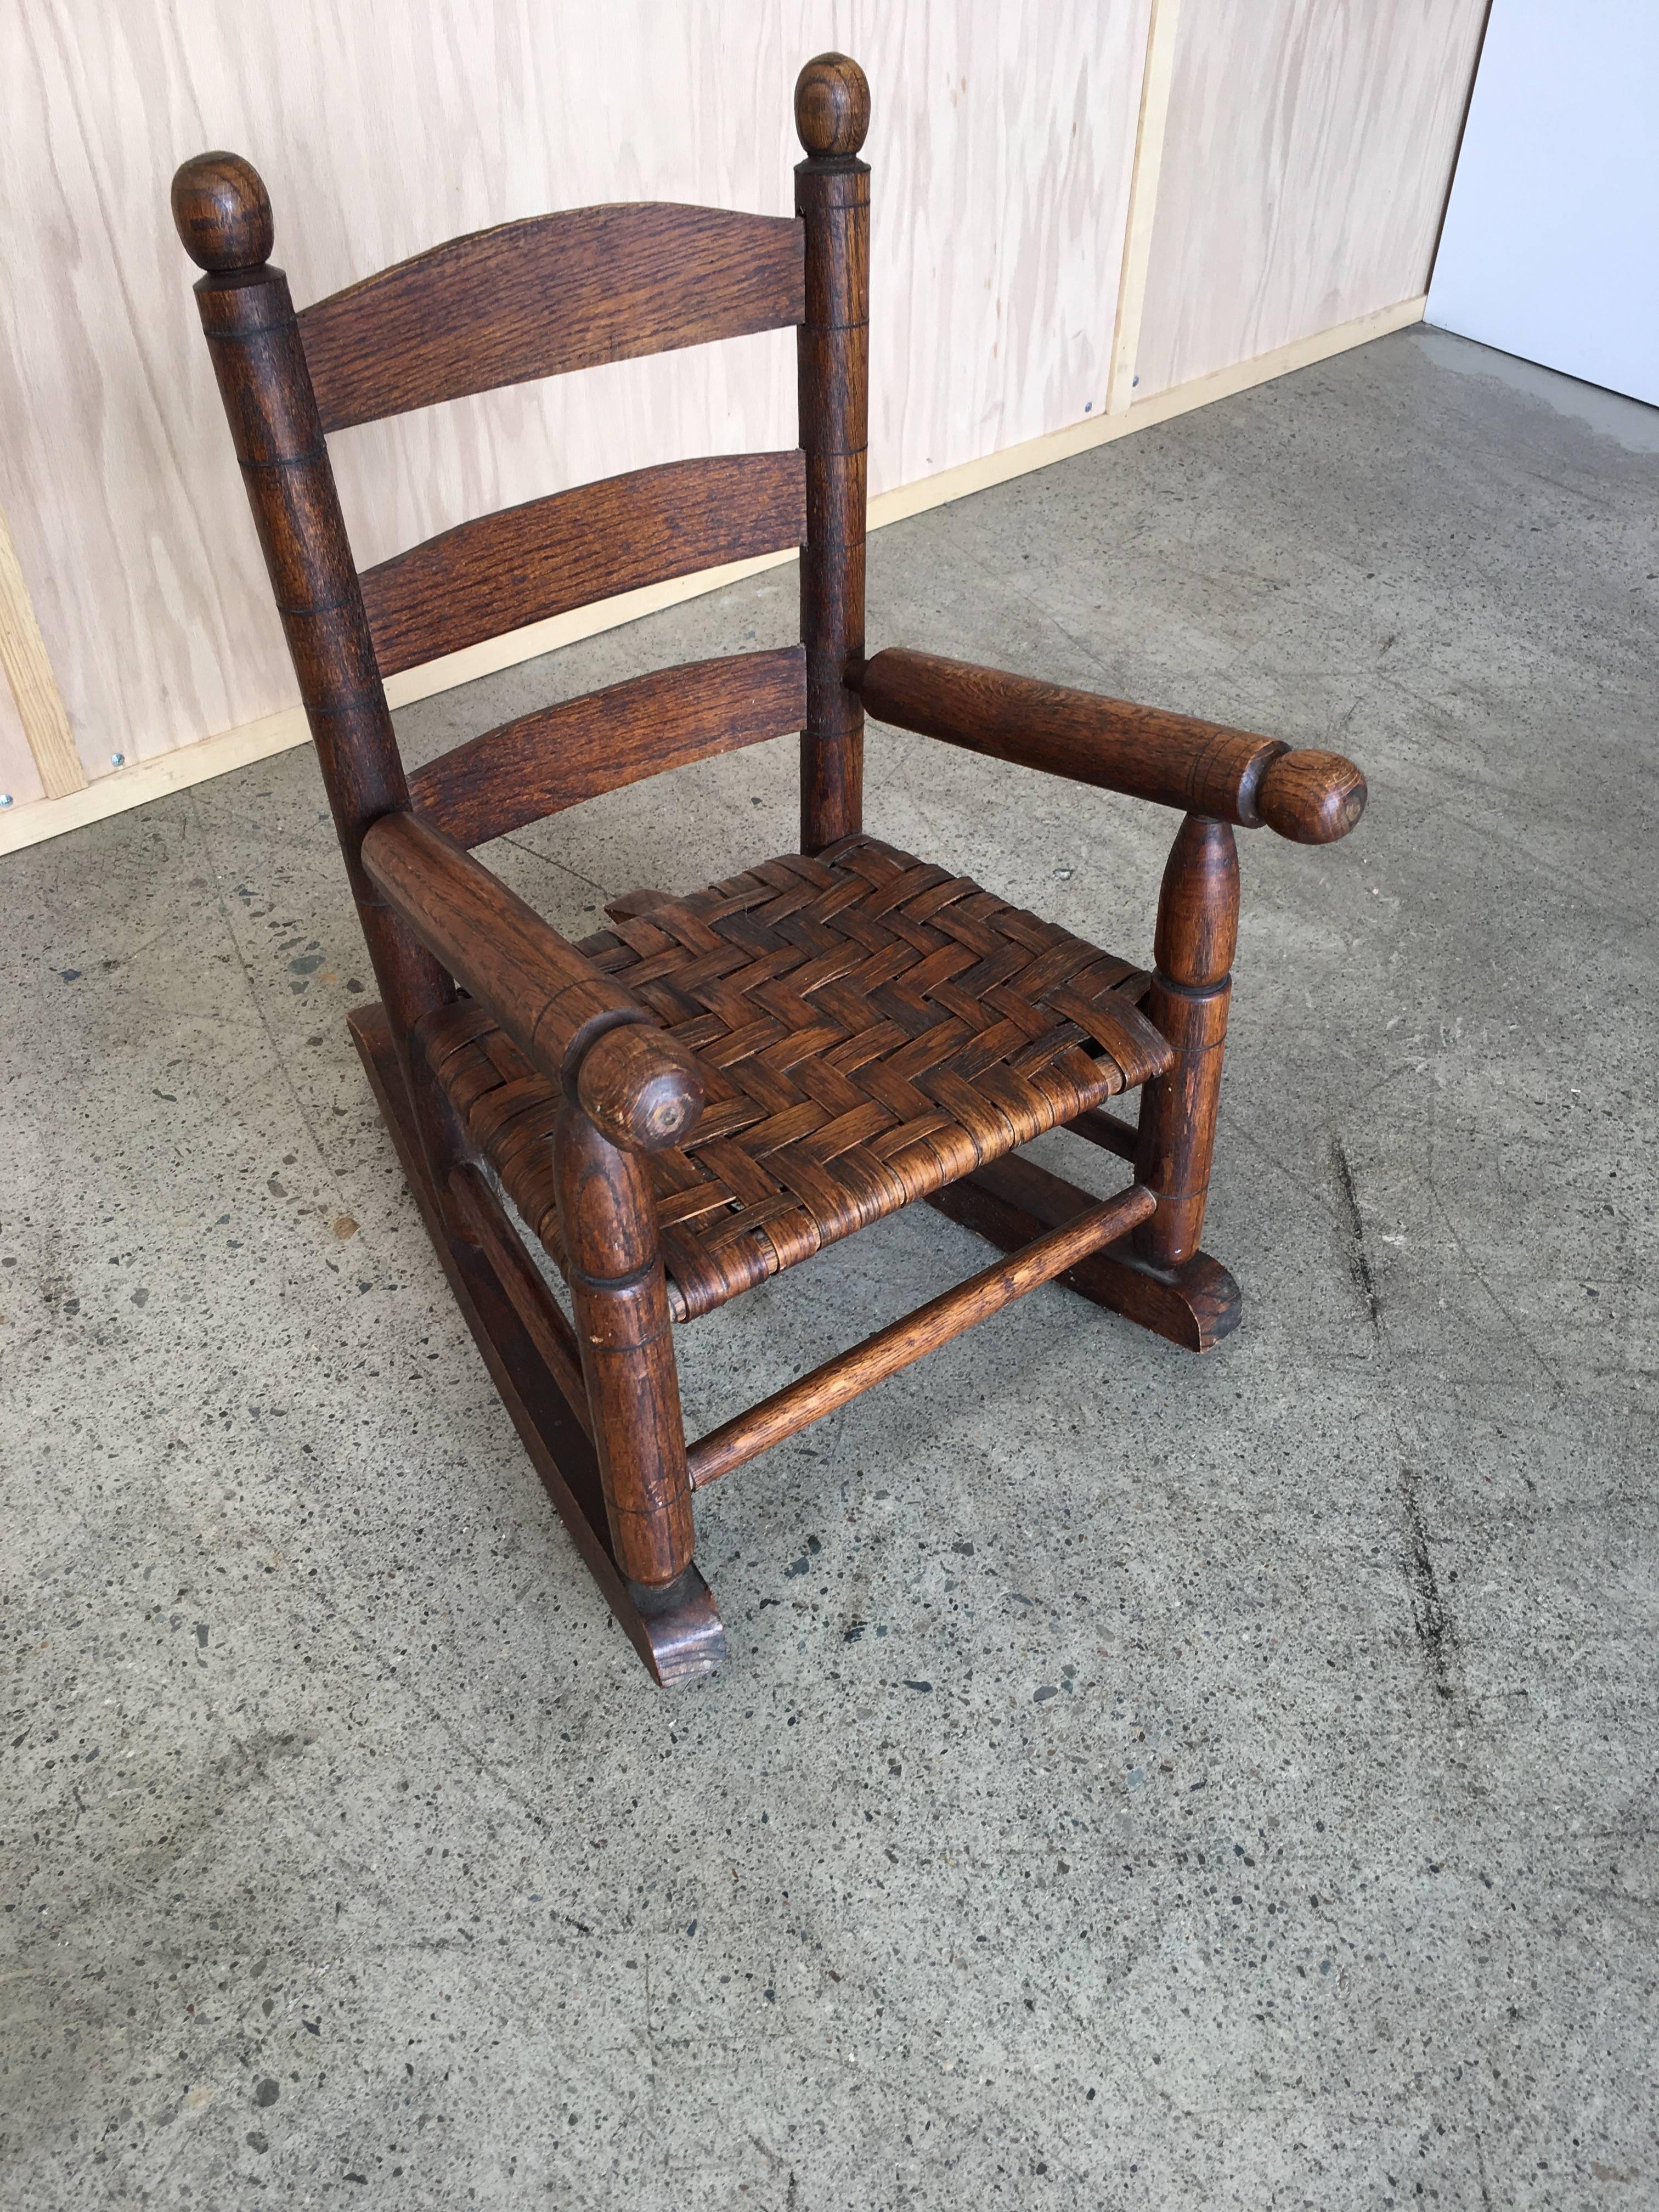 Basket Weave Country Childs Rocking Chair In Good Condition For Sale In Denton, TX